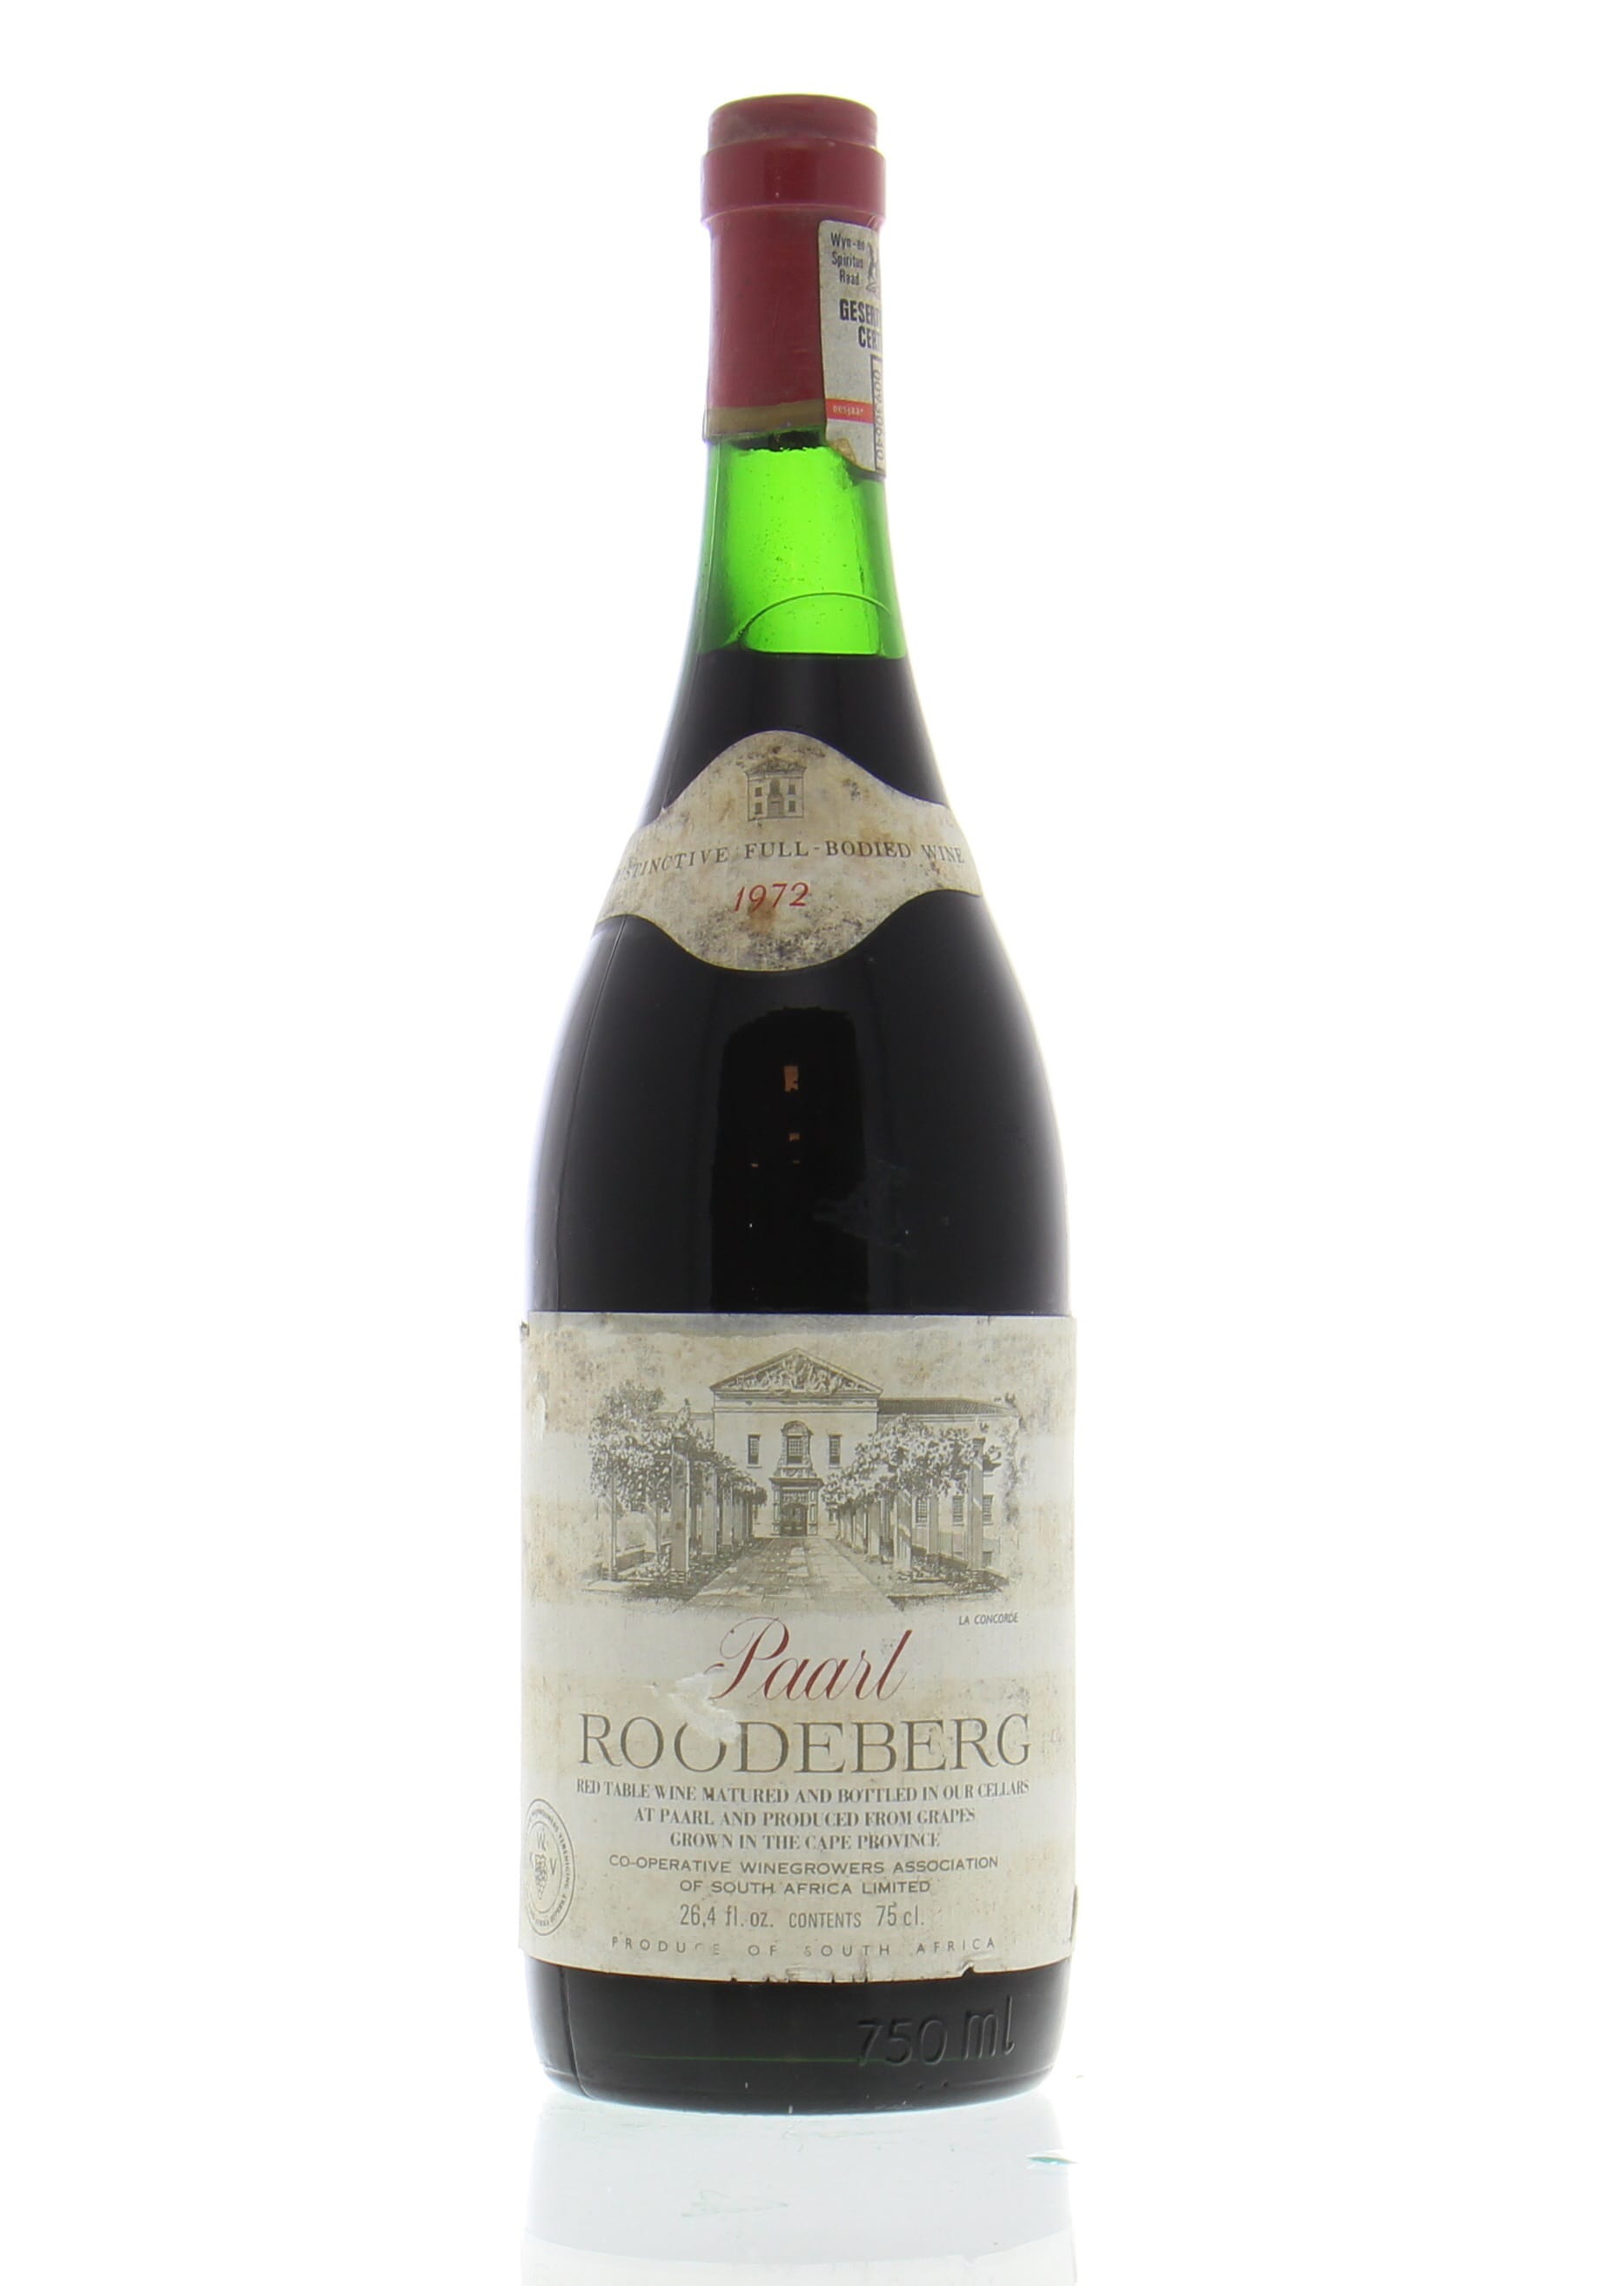 Paarl Roodenberg - Red wine 1972 Perfect